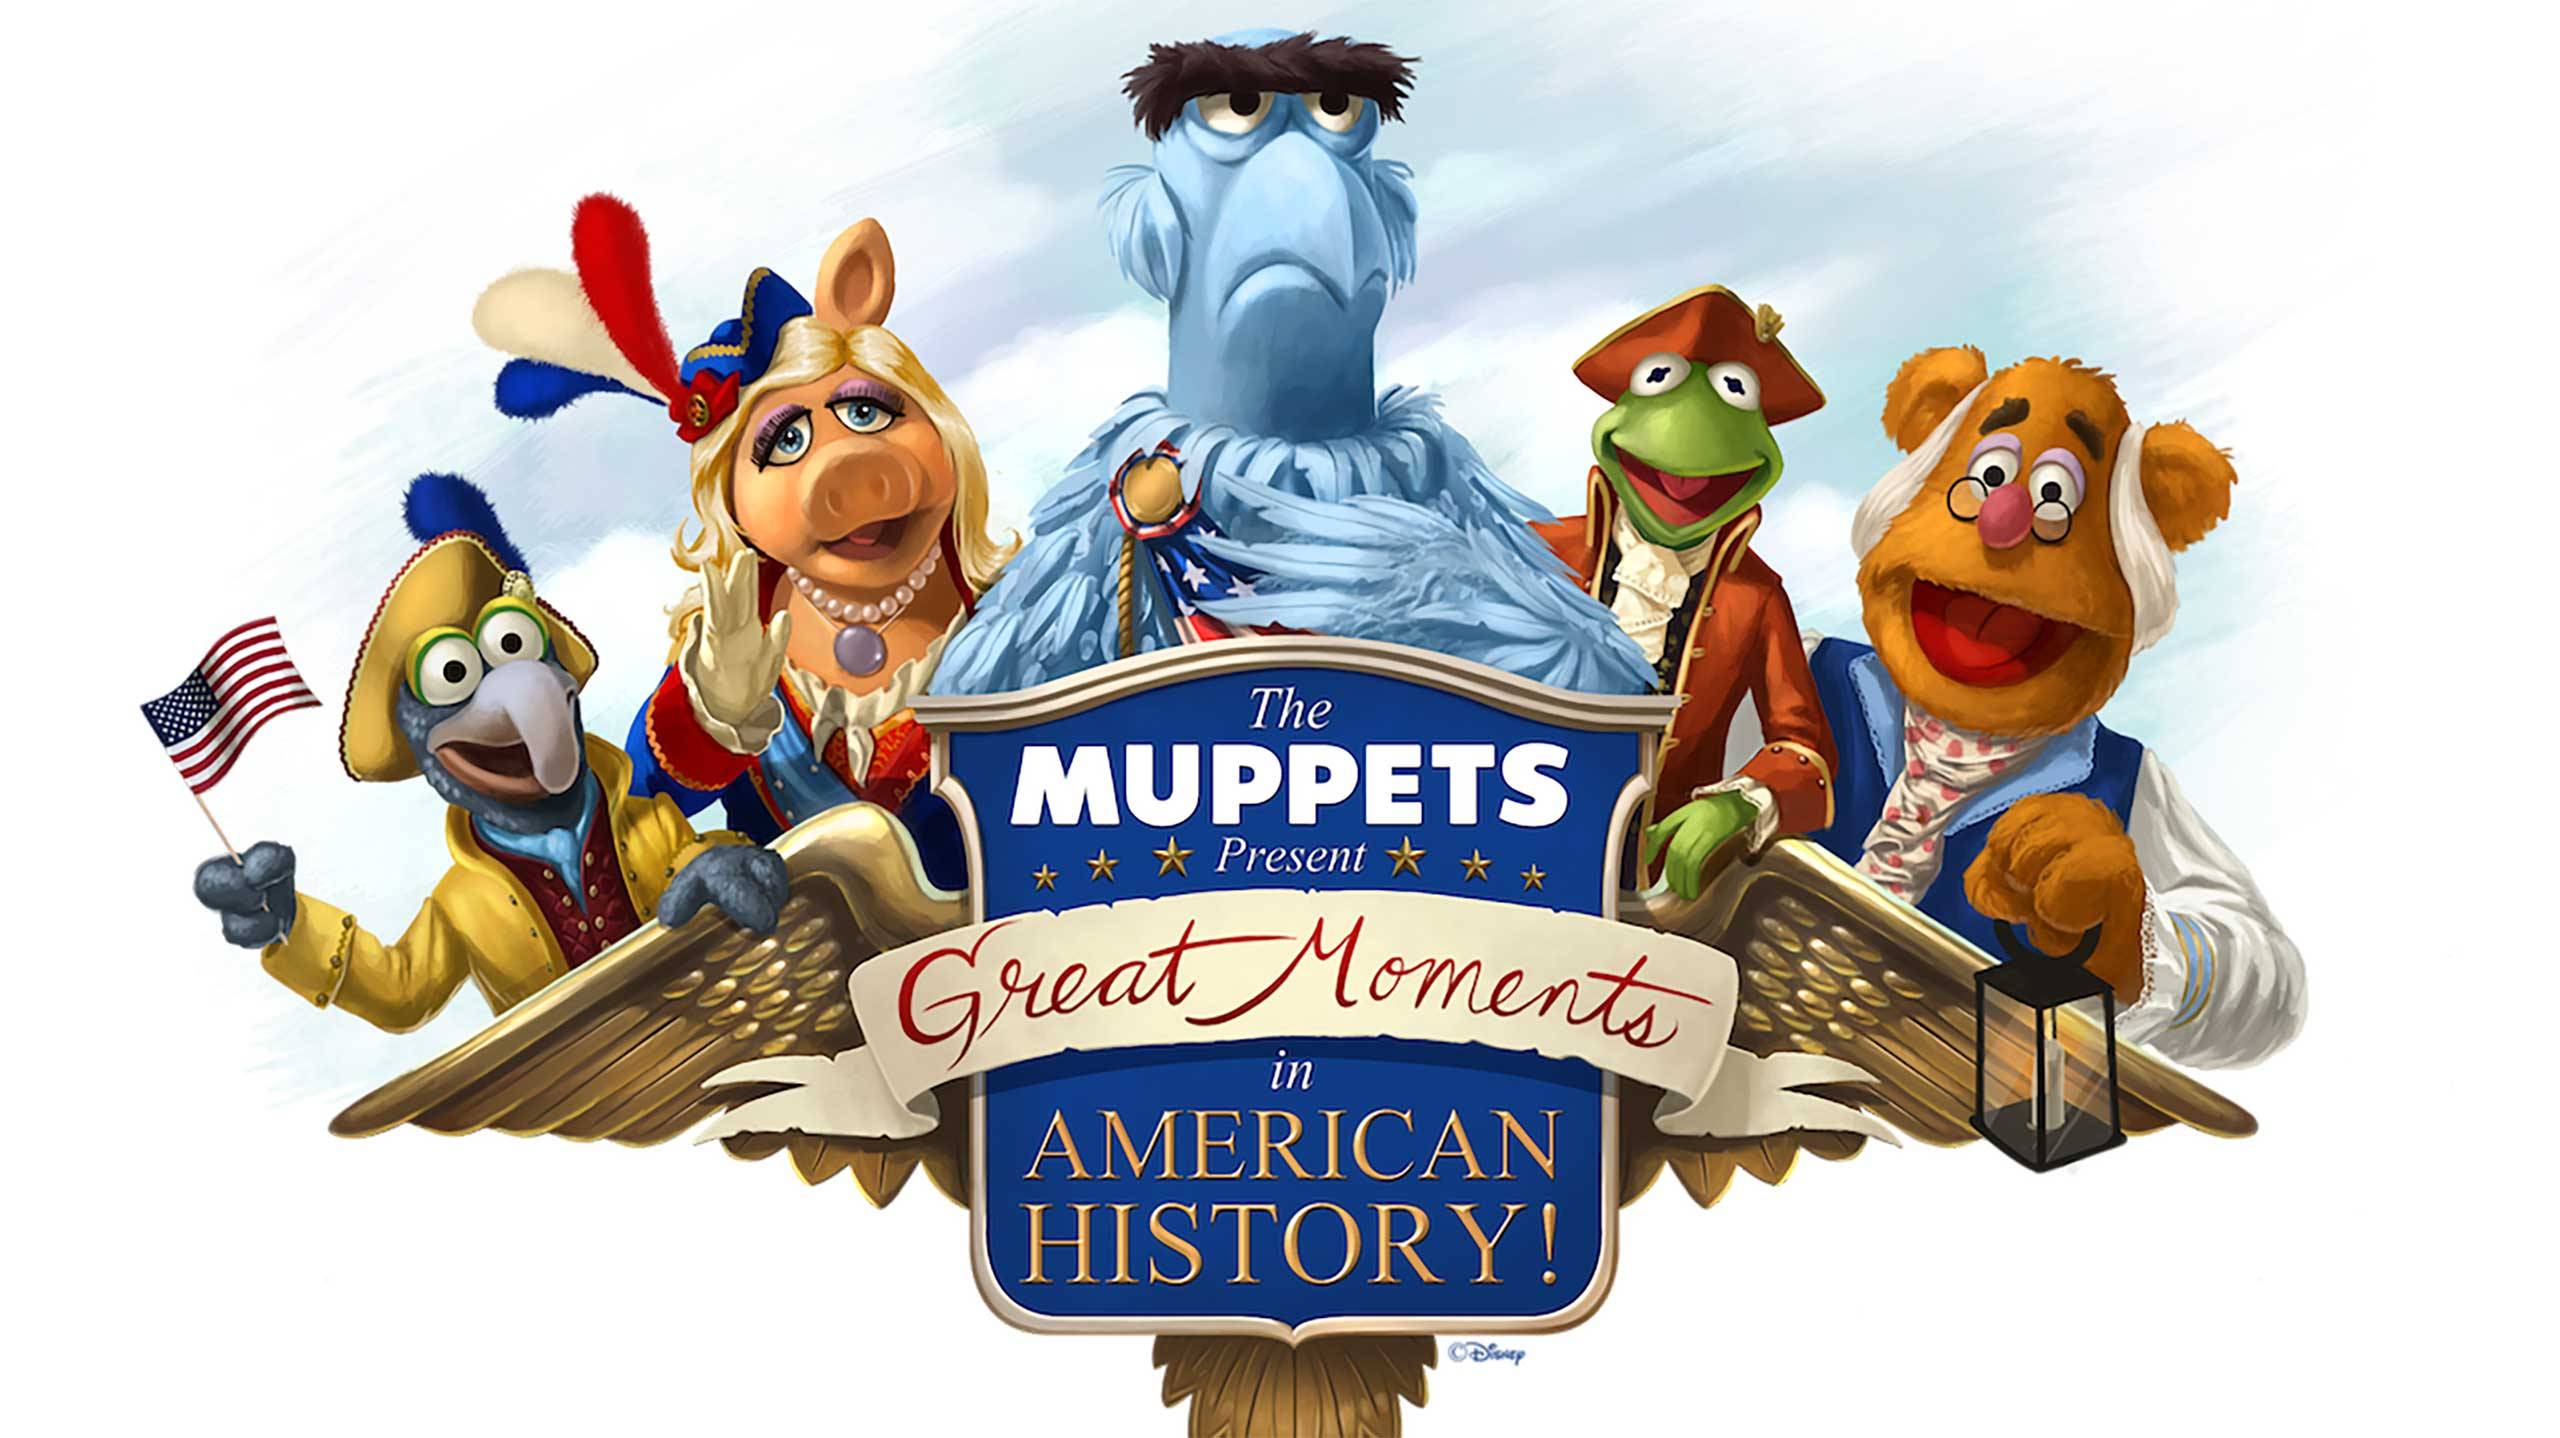 'The Muppets Present… Great Moments in American History' opens October 2 at the Magic Kingdom